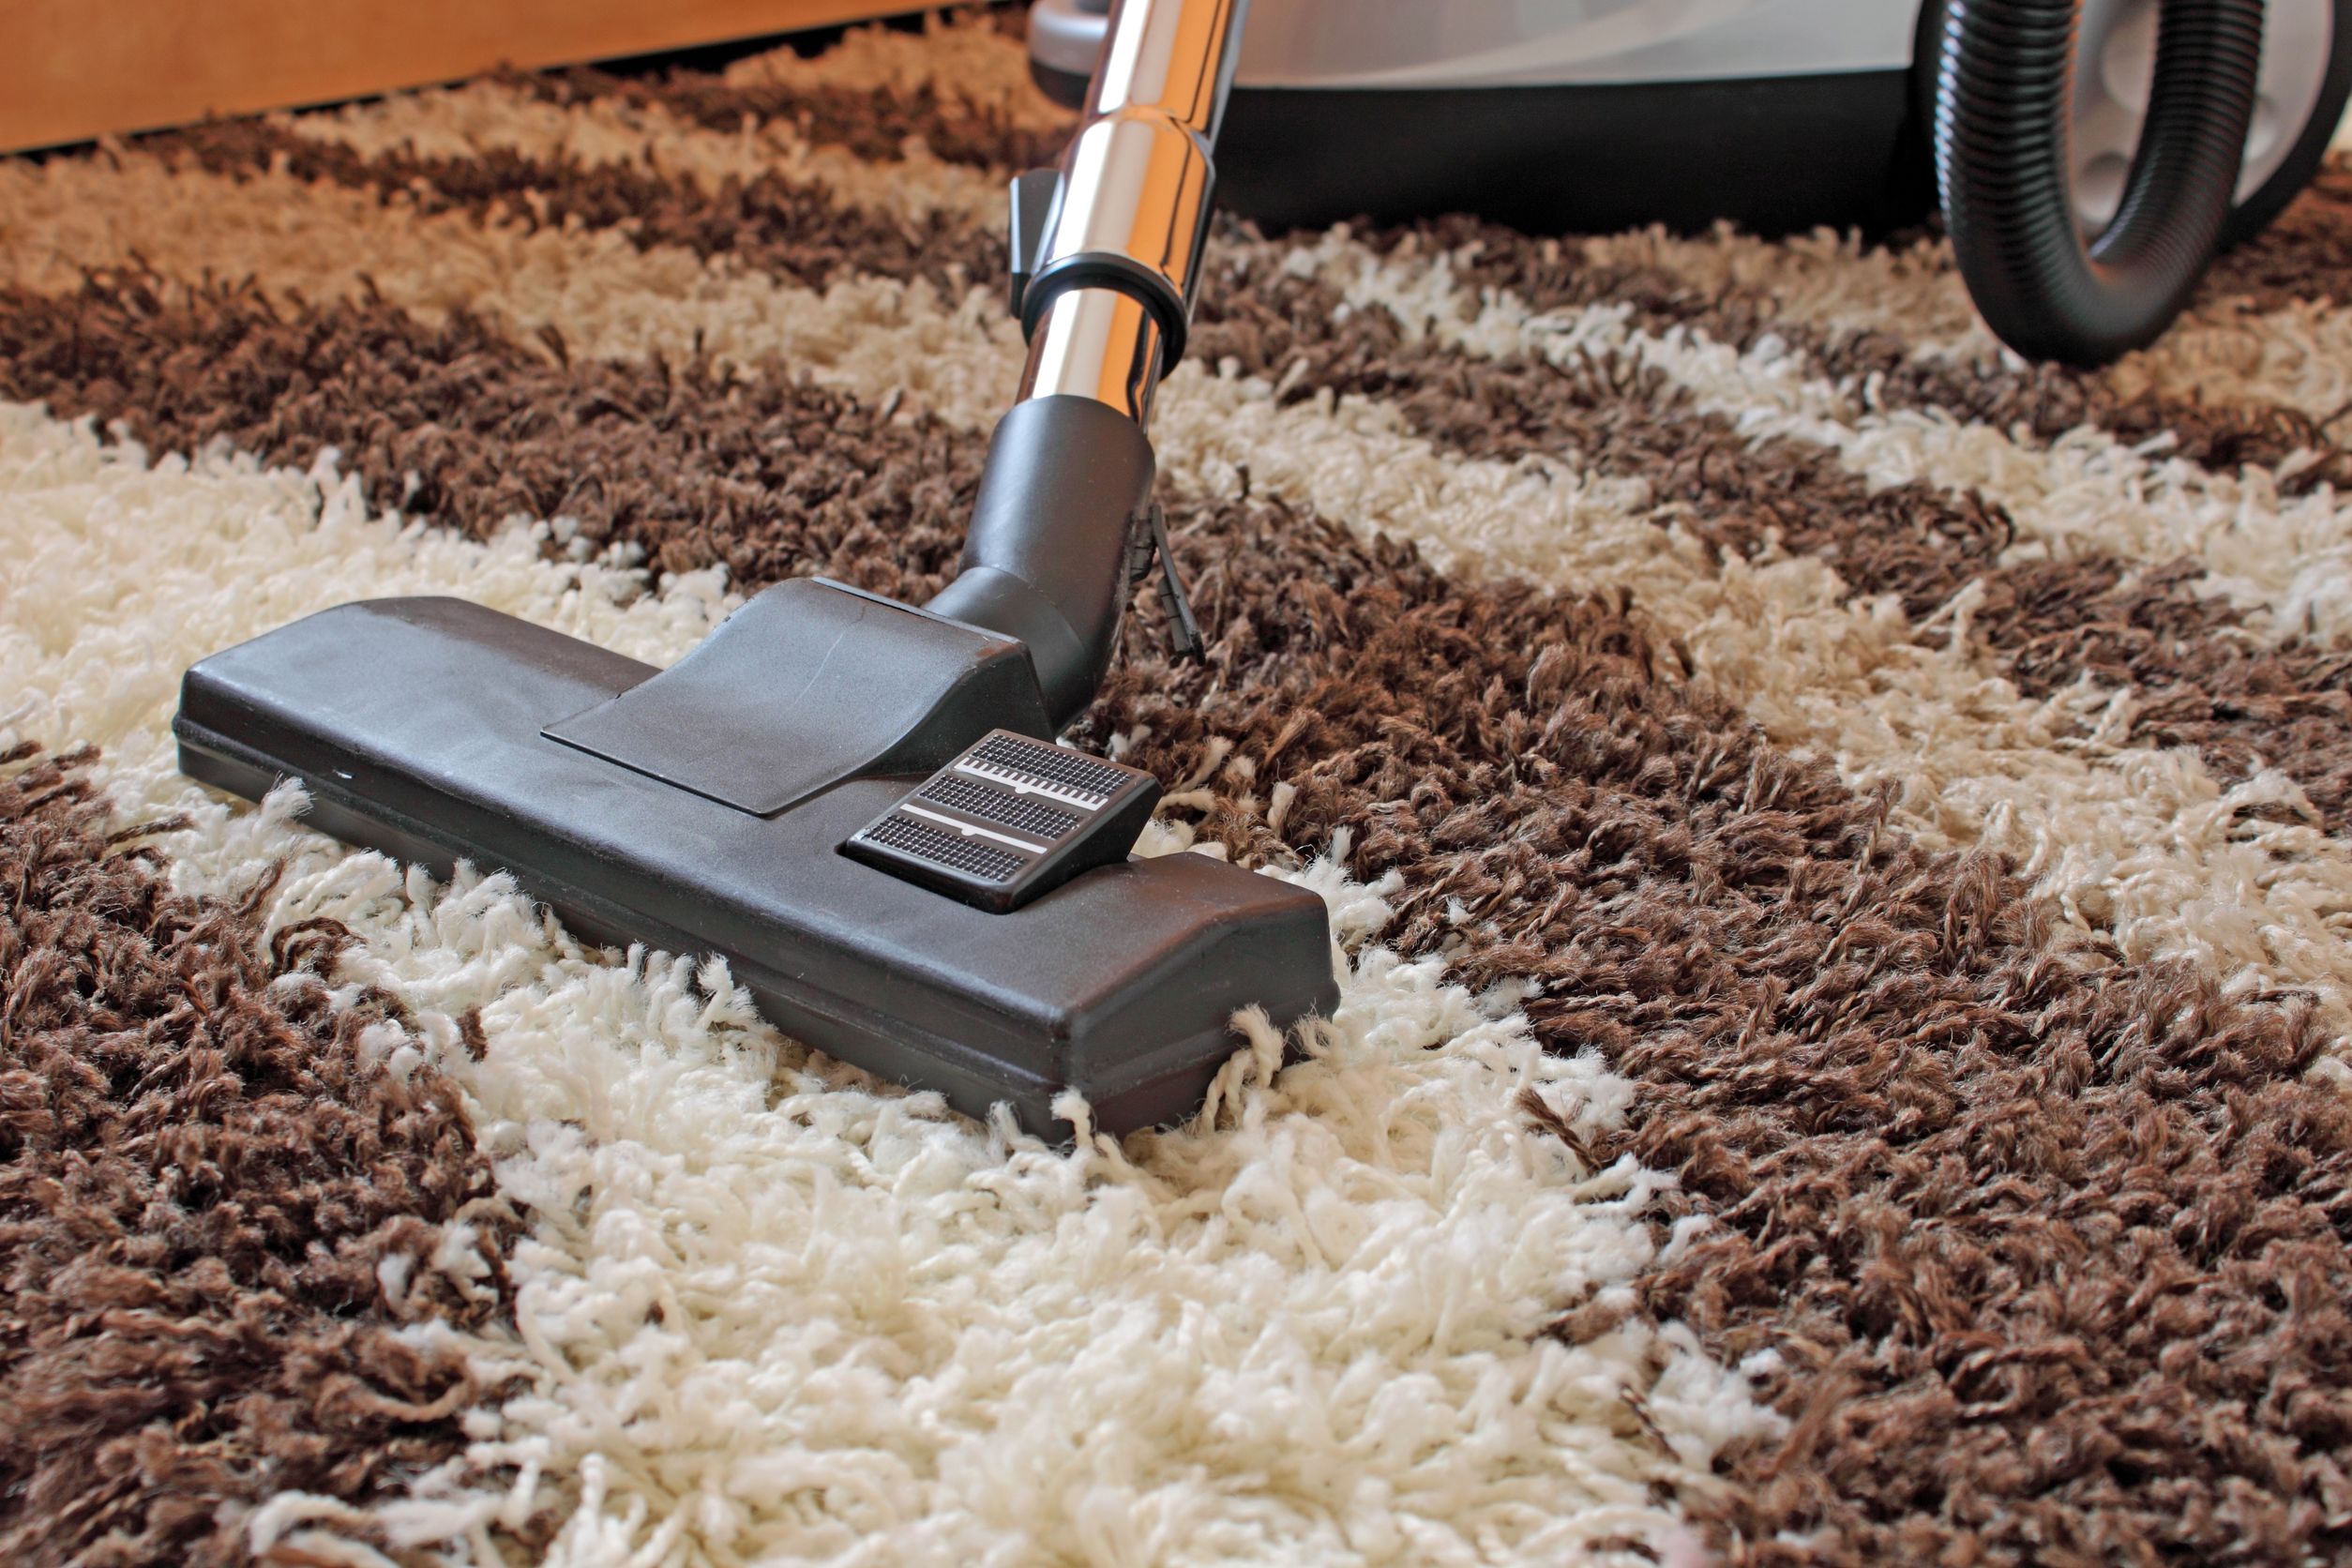 Specialized Carpet Cleaning Supplies For All Your Cleaning Needs